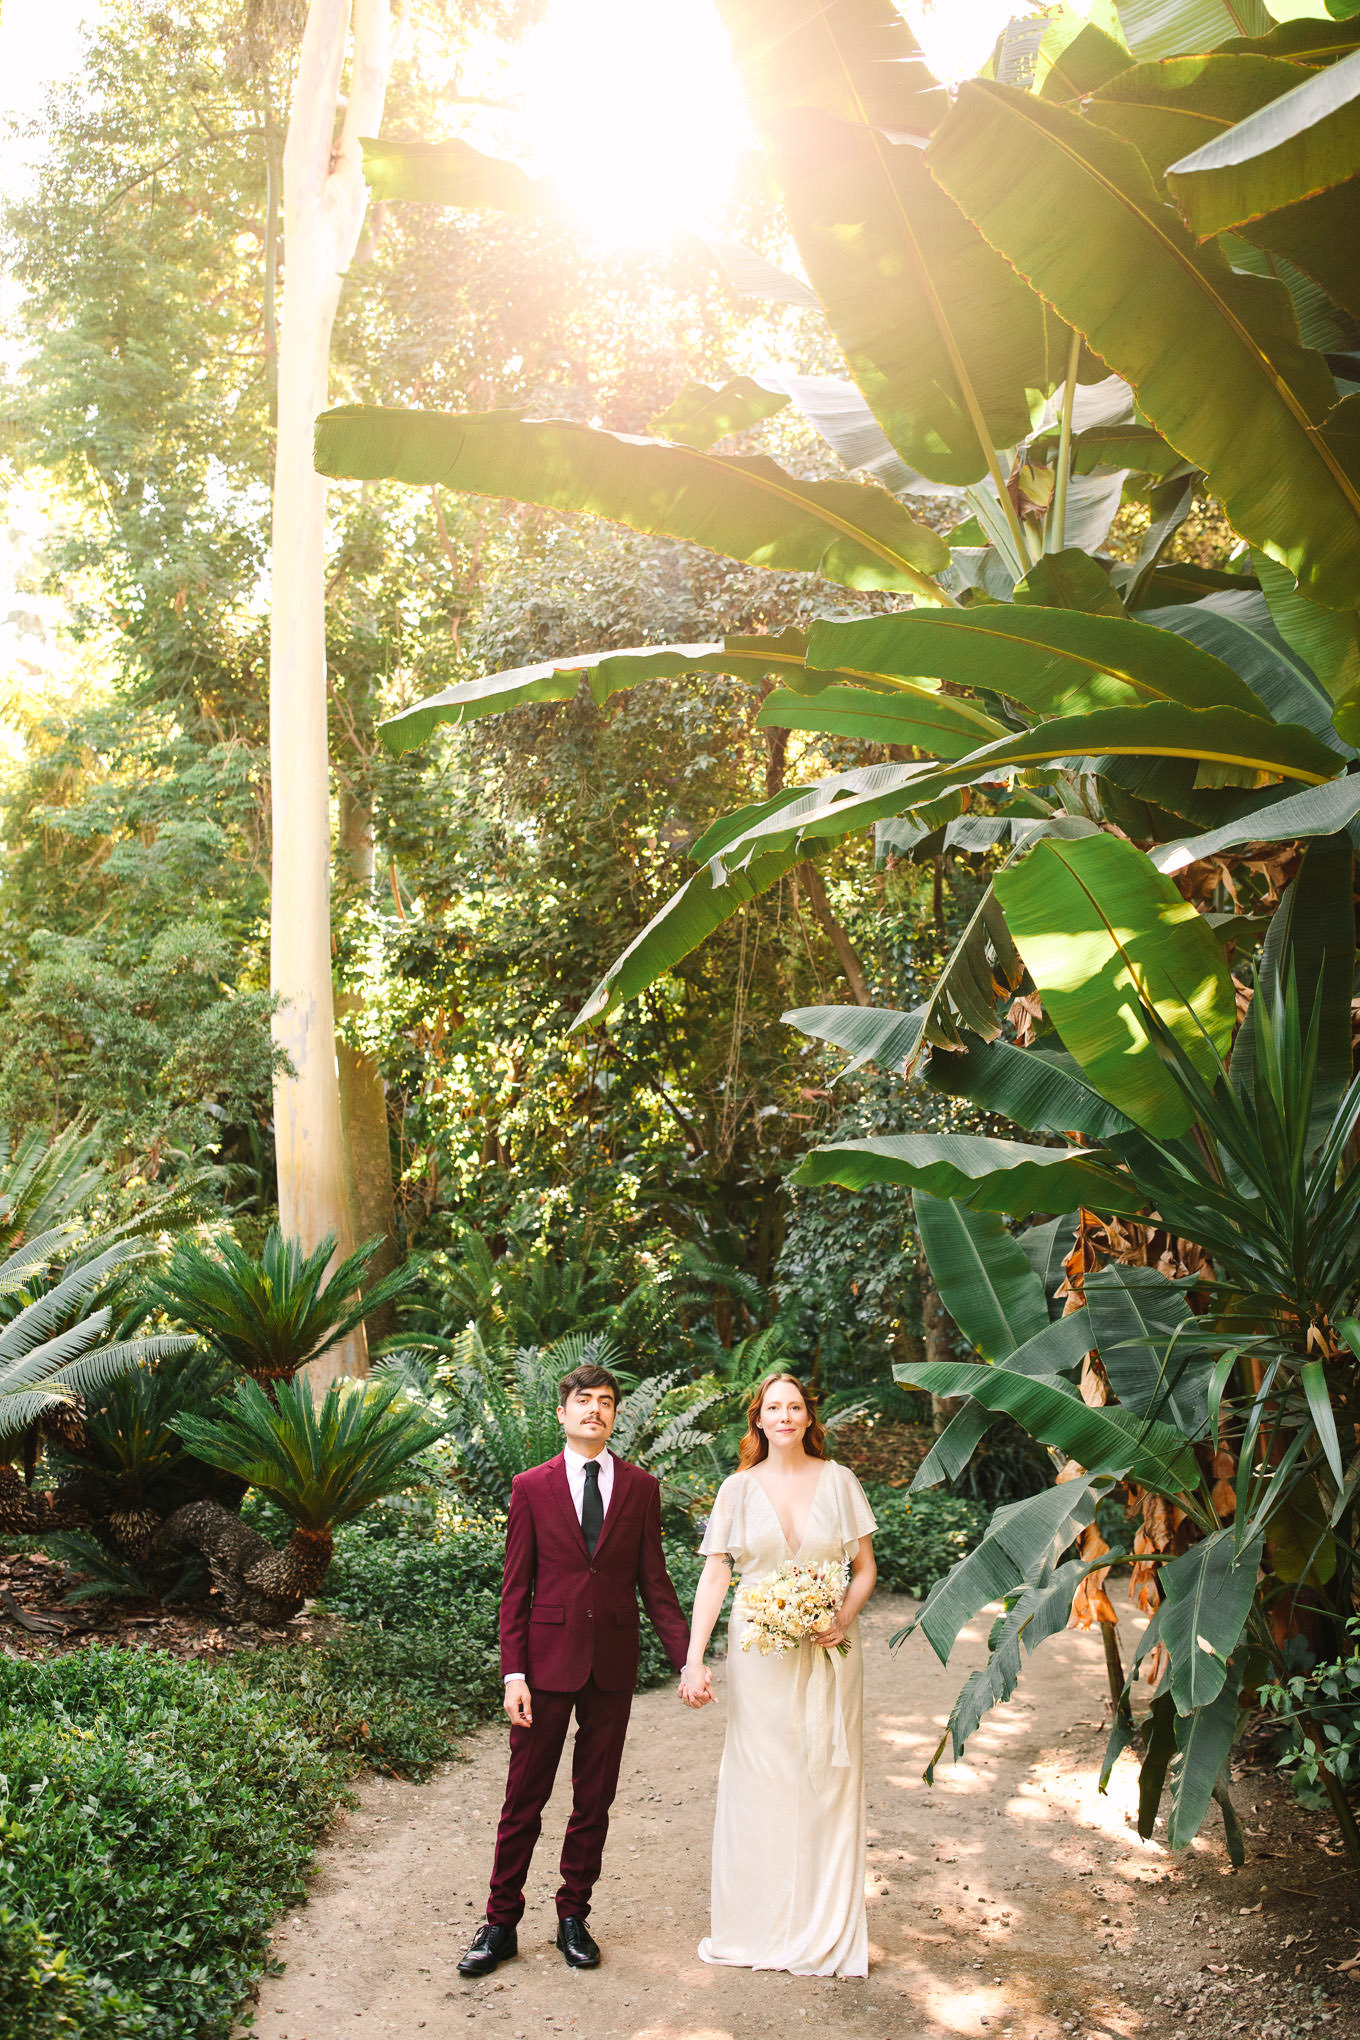 Bride and groom standing in prehistoric garden | Los Angeles Arboretum Elopement | Colorful and elevated wedding photography for fun-loving couples in Southern California | #LosAngelesElopement #elopement #LAarboretum #LAskyline #elopementphotos   Source: Mary Costa Photography | Los Angeles